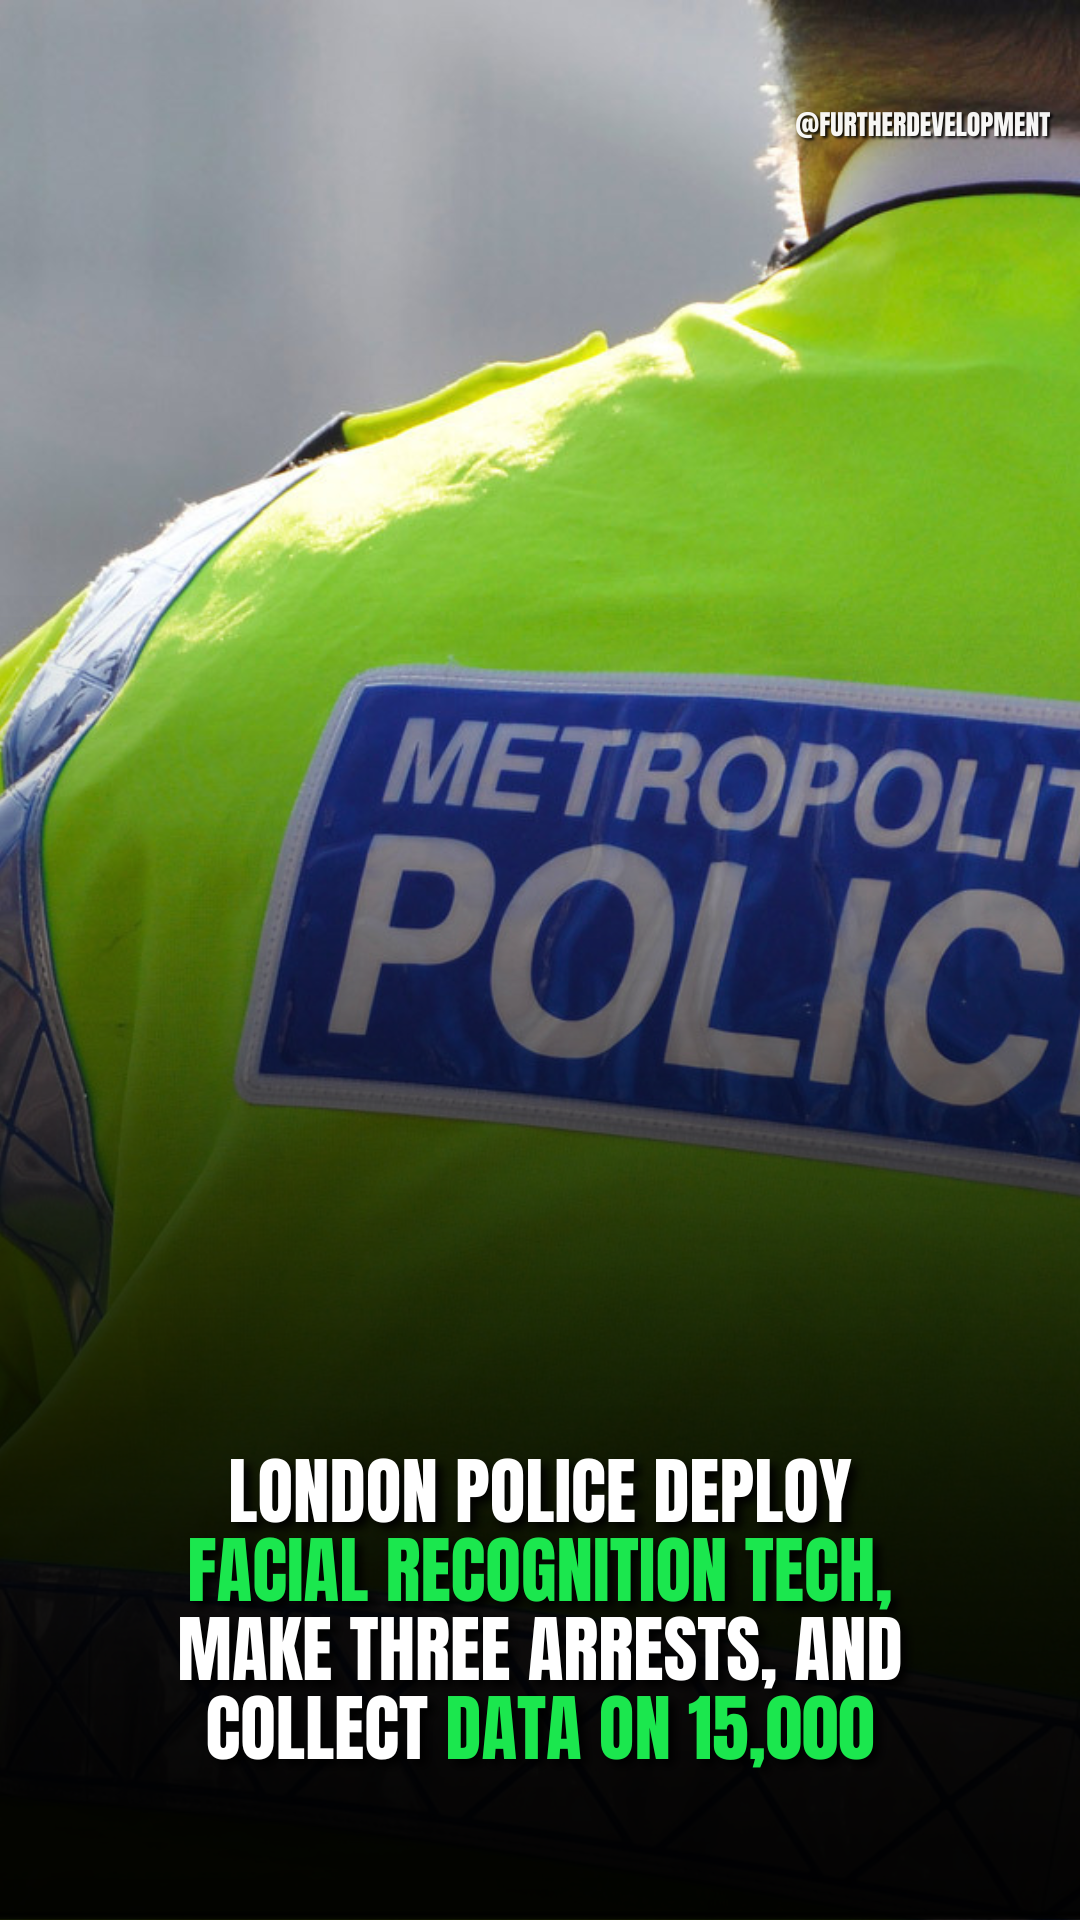 London police deploy facial recognition tech, make three arrests, and collect data on 15,000